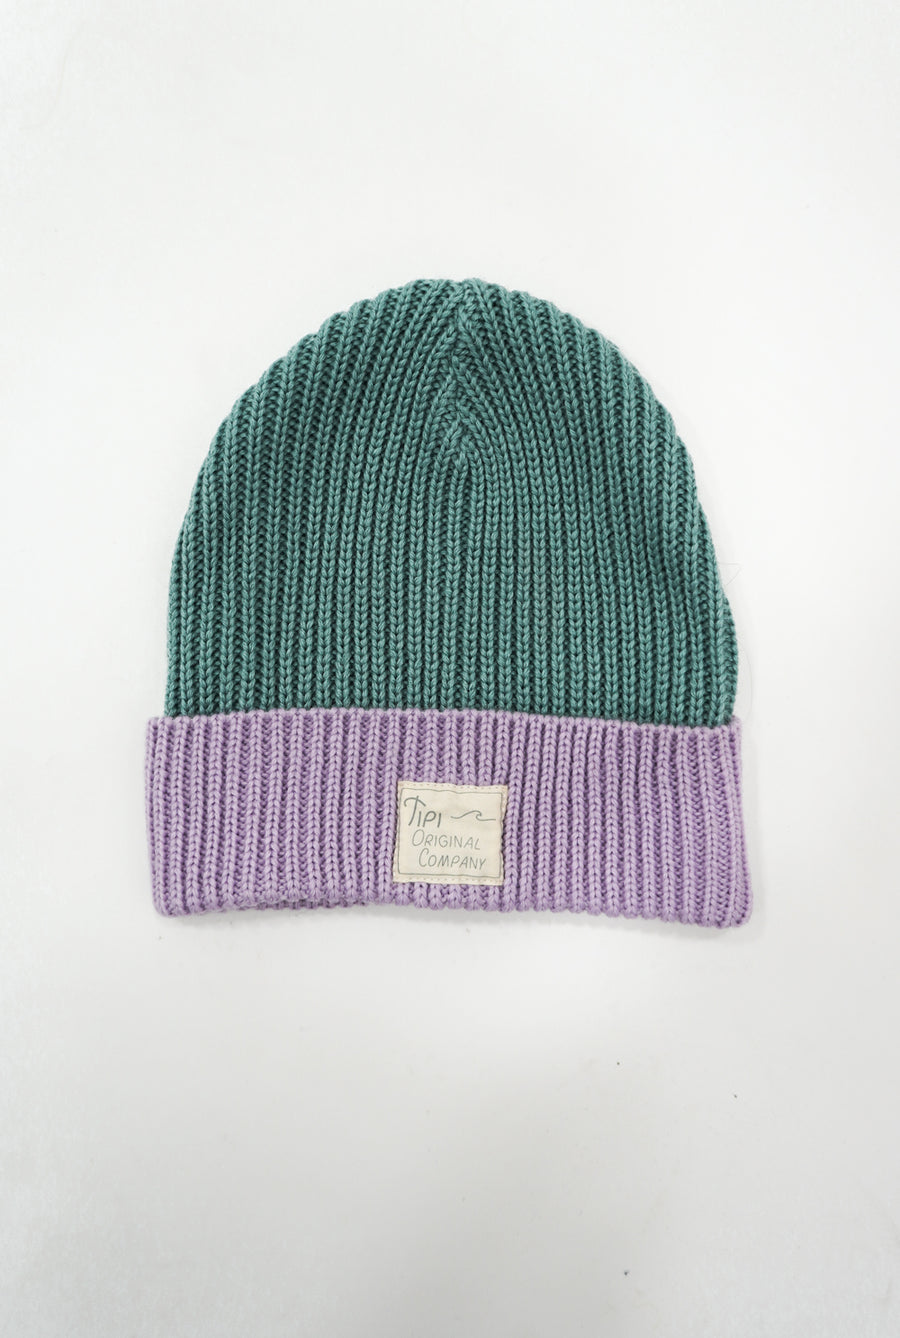 Gorrito Green and Violet